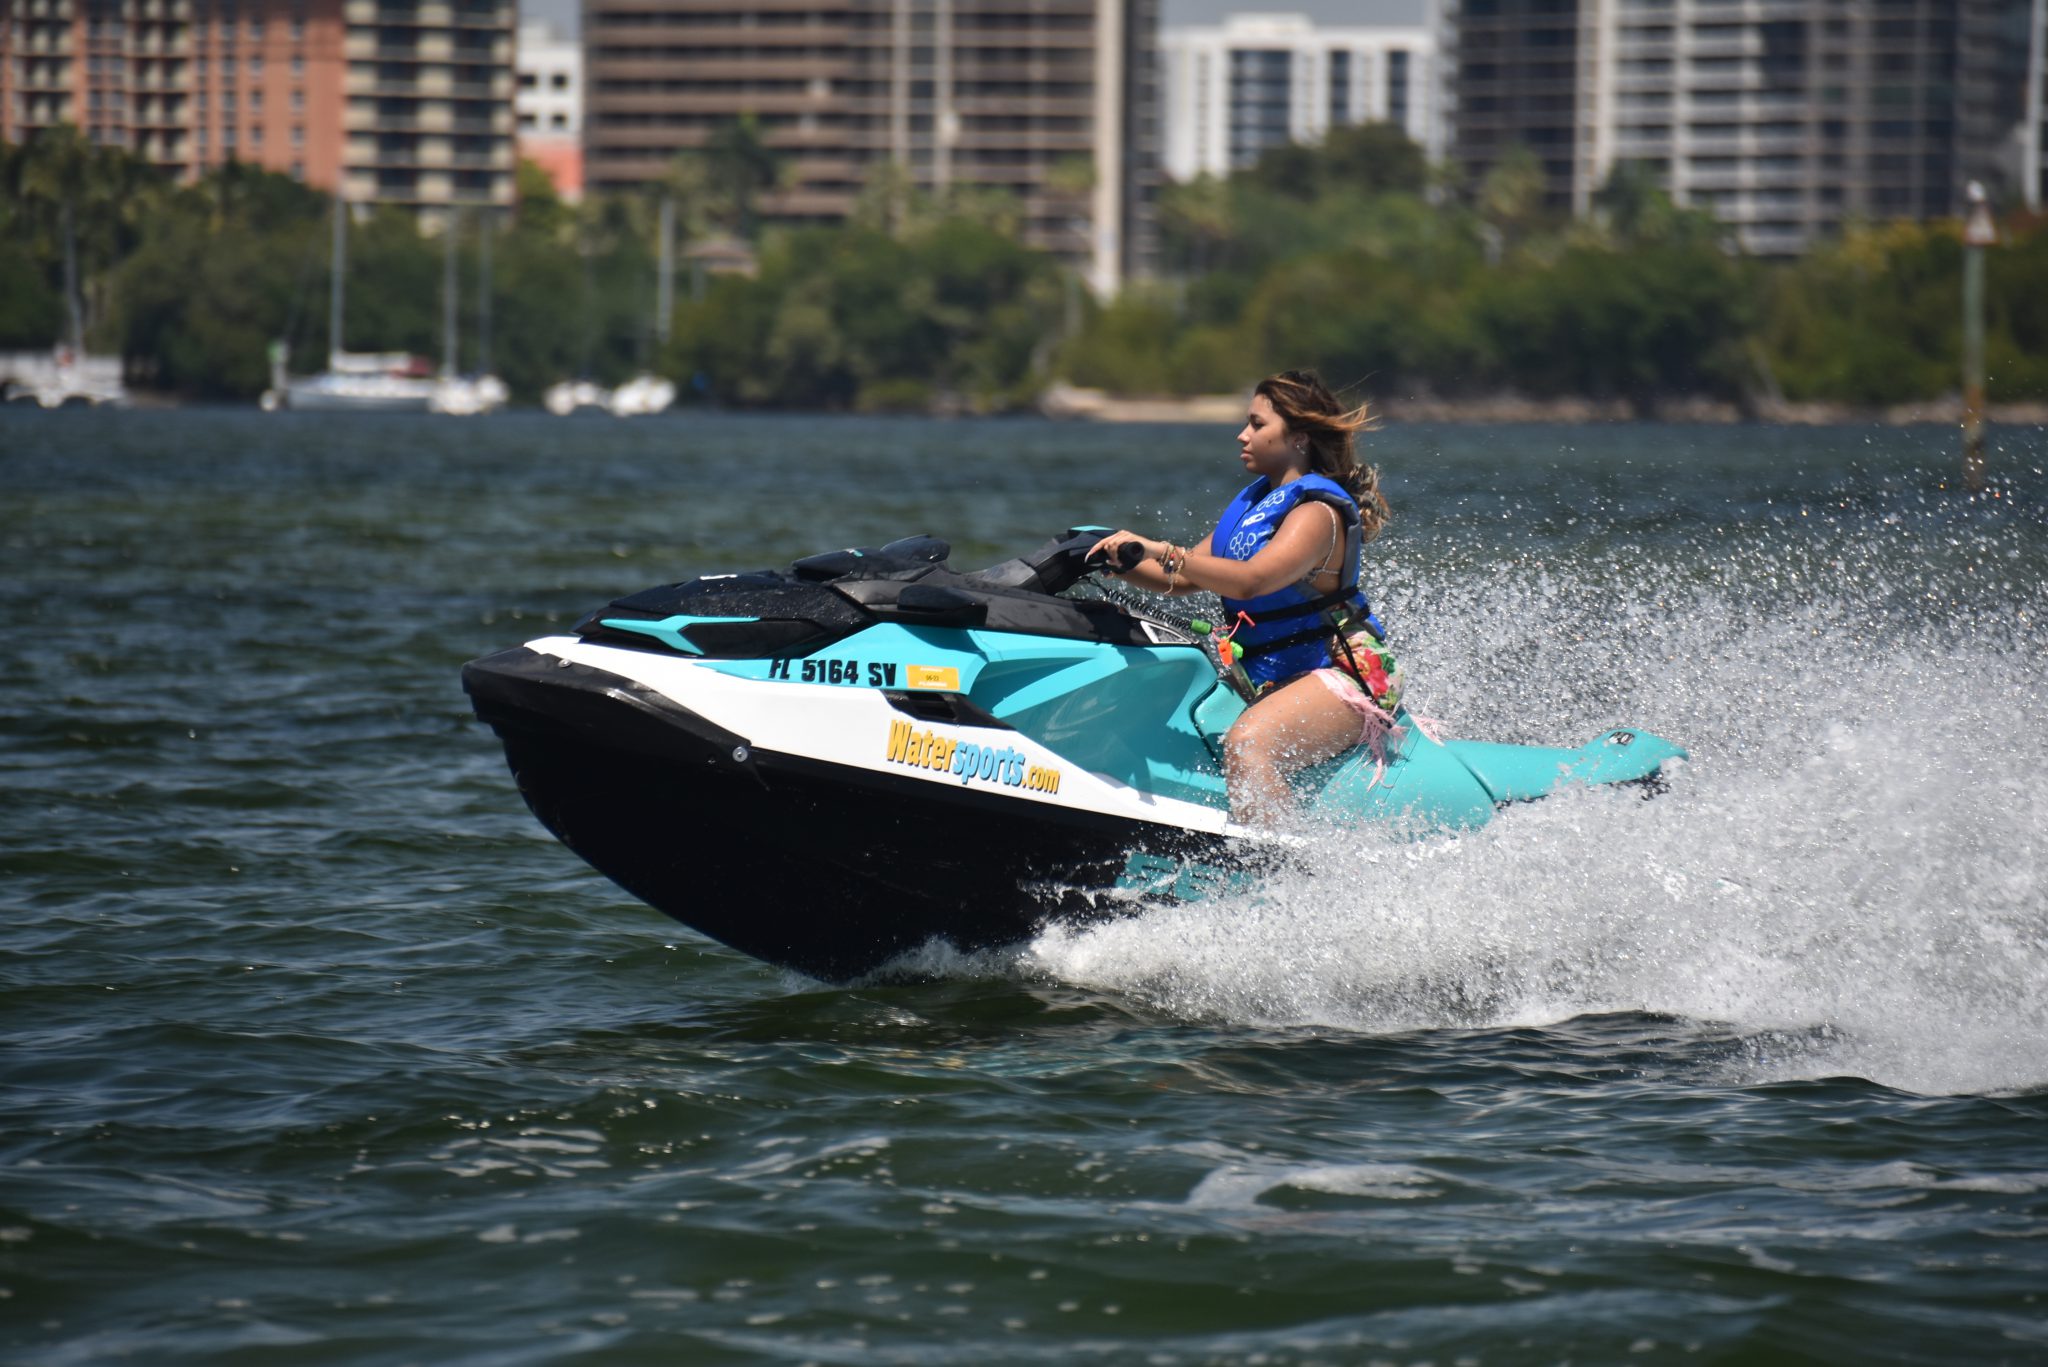 Jet Skiing in Miami, Strategies for Avoiding Crowds